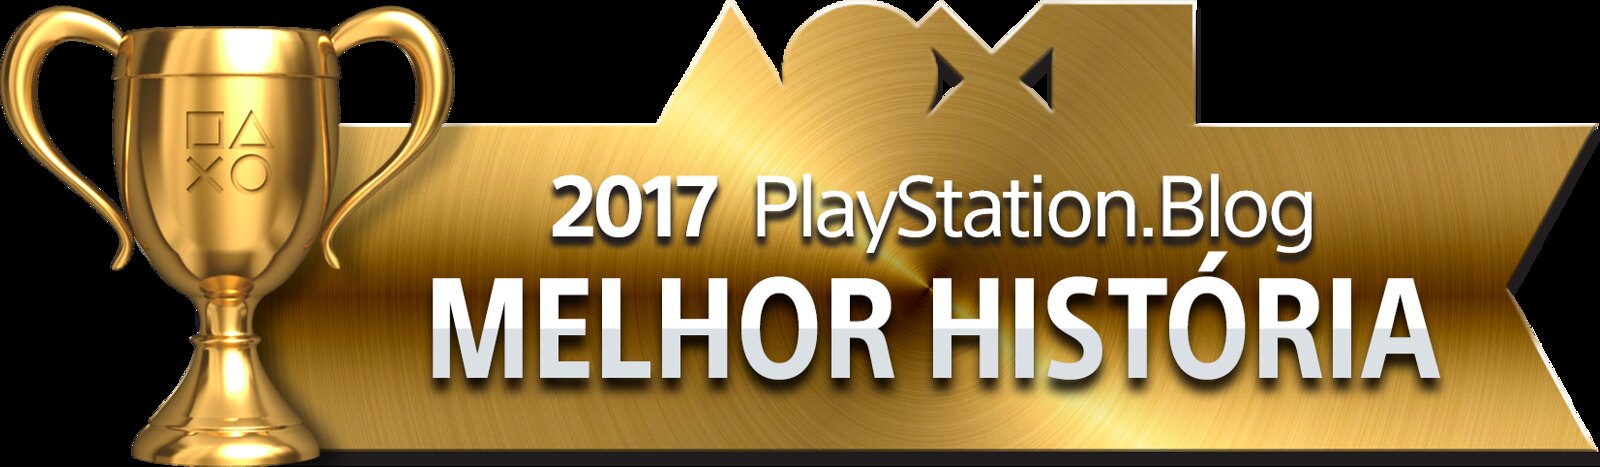 PlayStation Blog Game of the Year 2017 - Best Story (Gold)